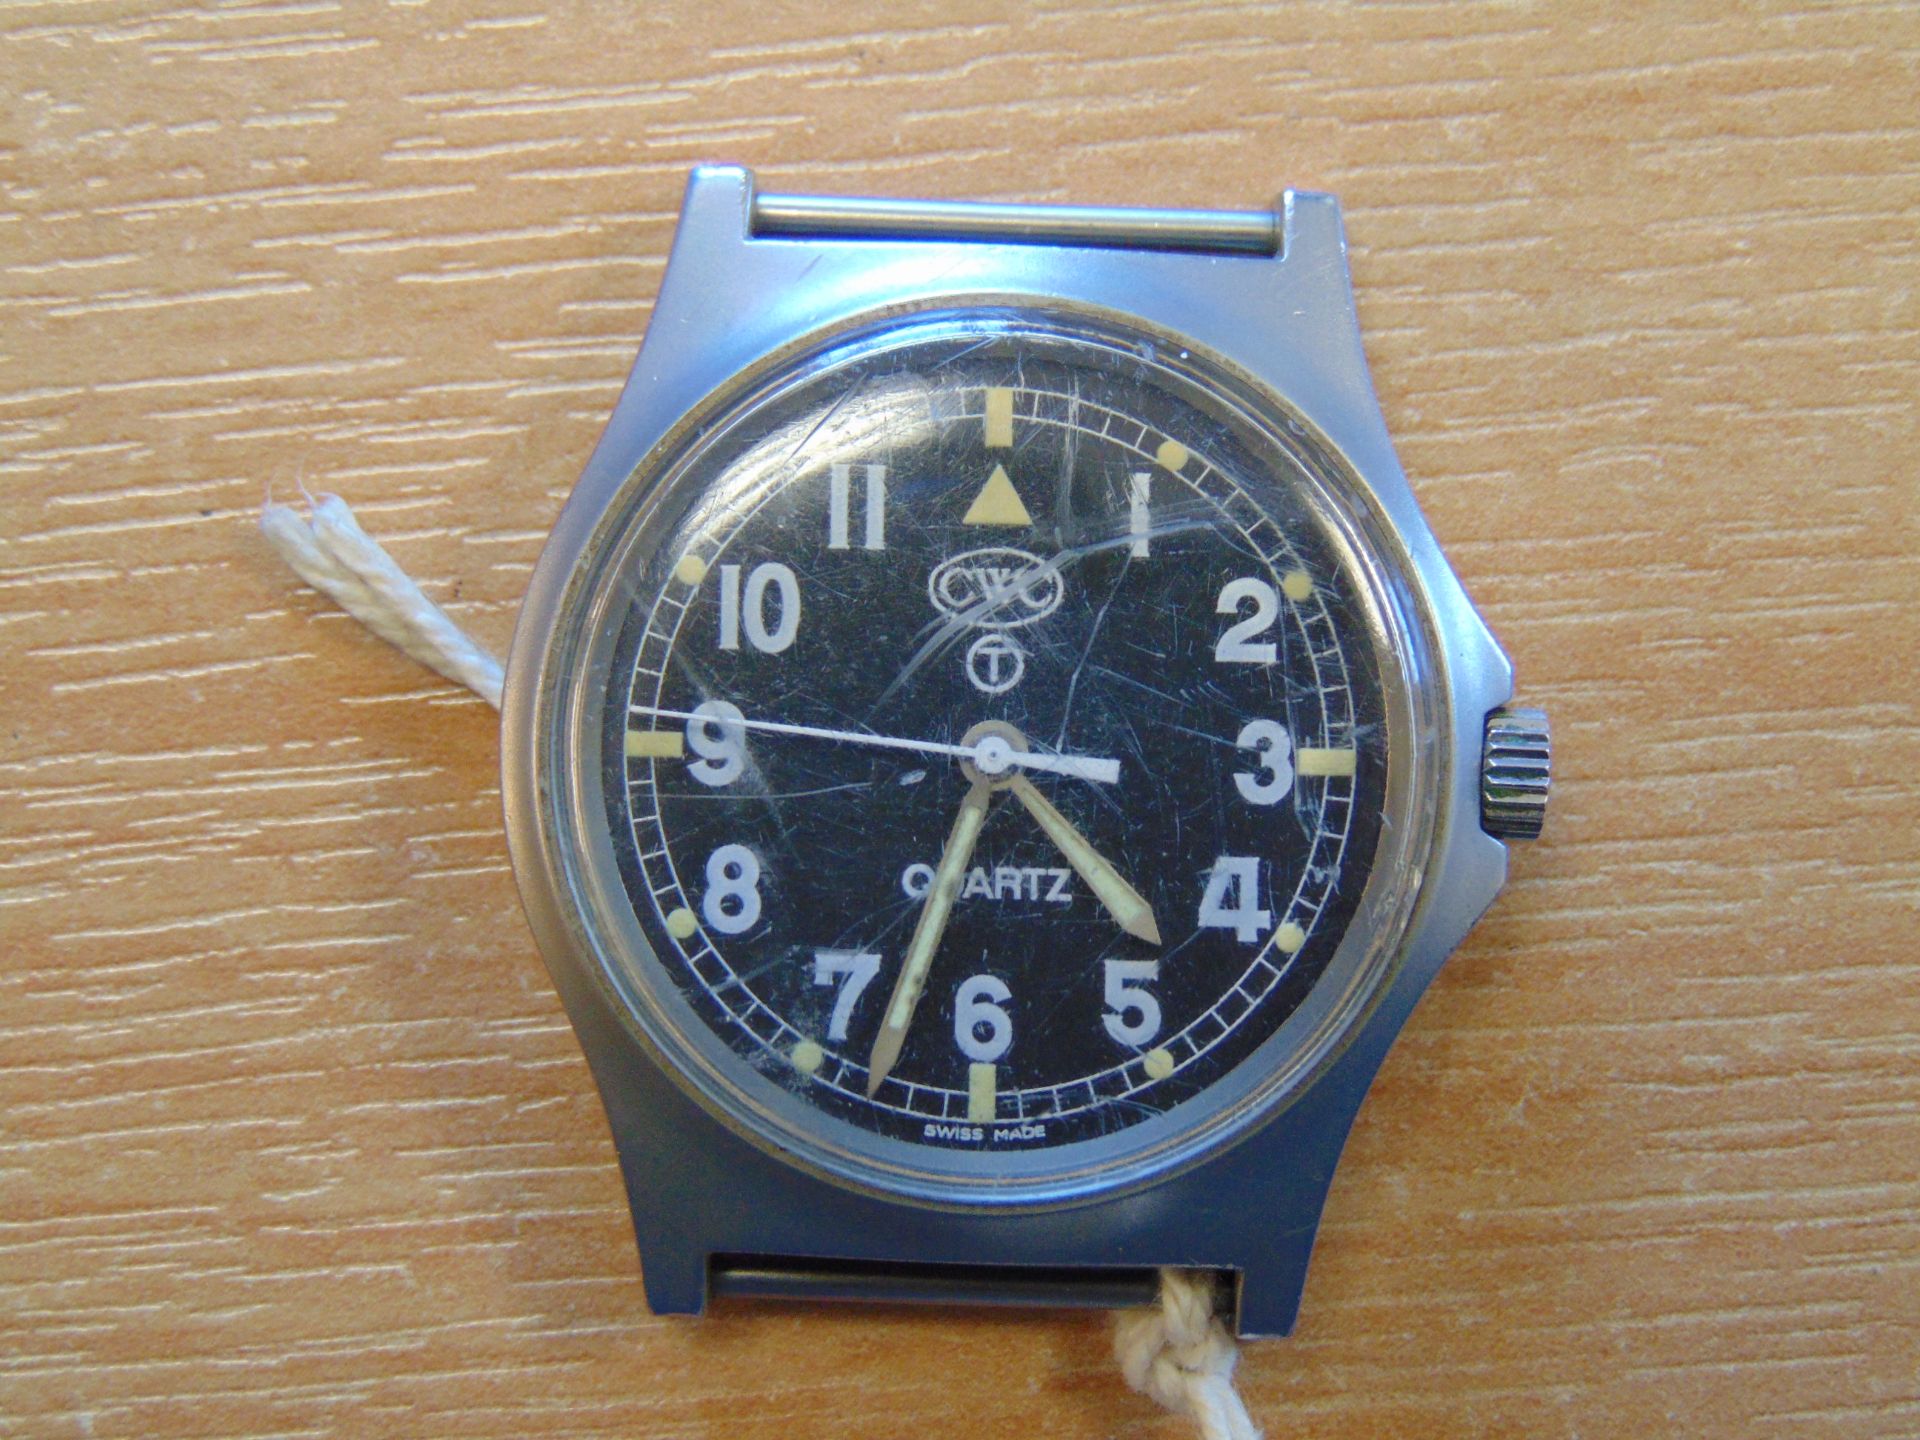 CWC W10 BRITISH ARMY SERVICE WATCH NATO MARKS DATE 1998 - Image 2 of 3